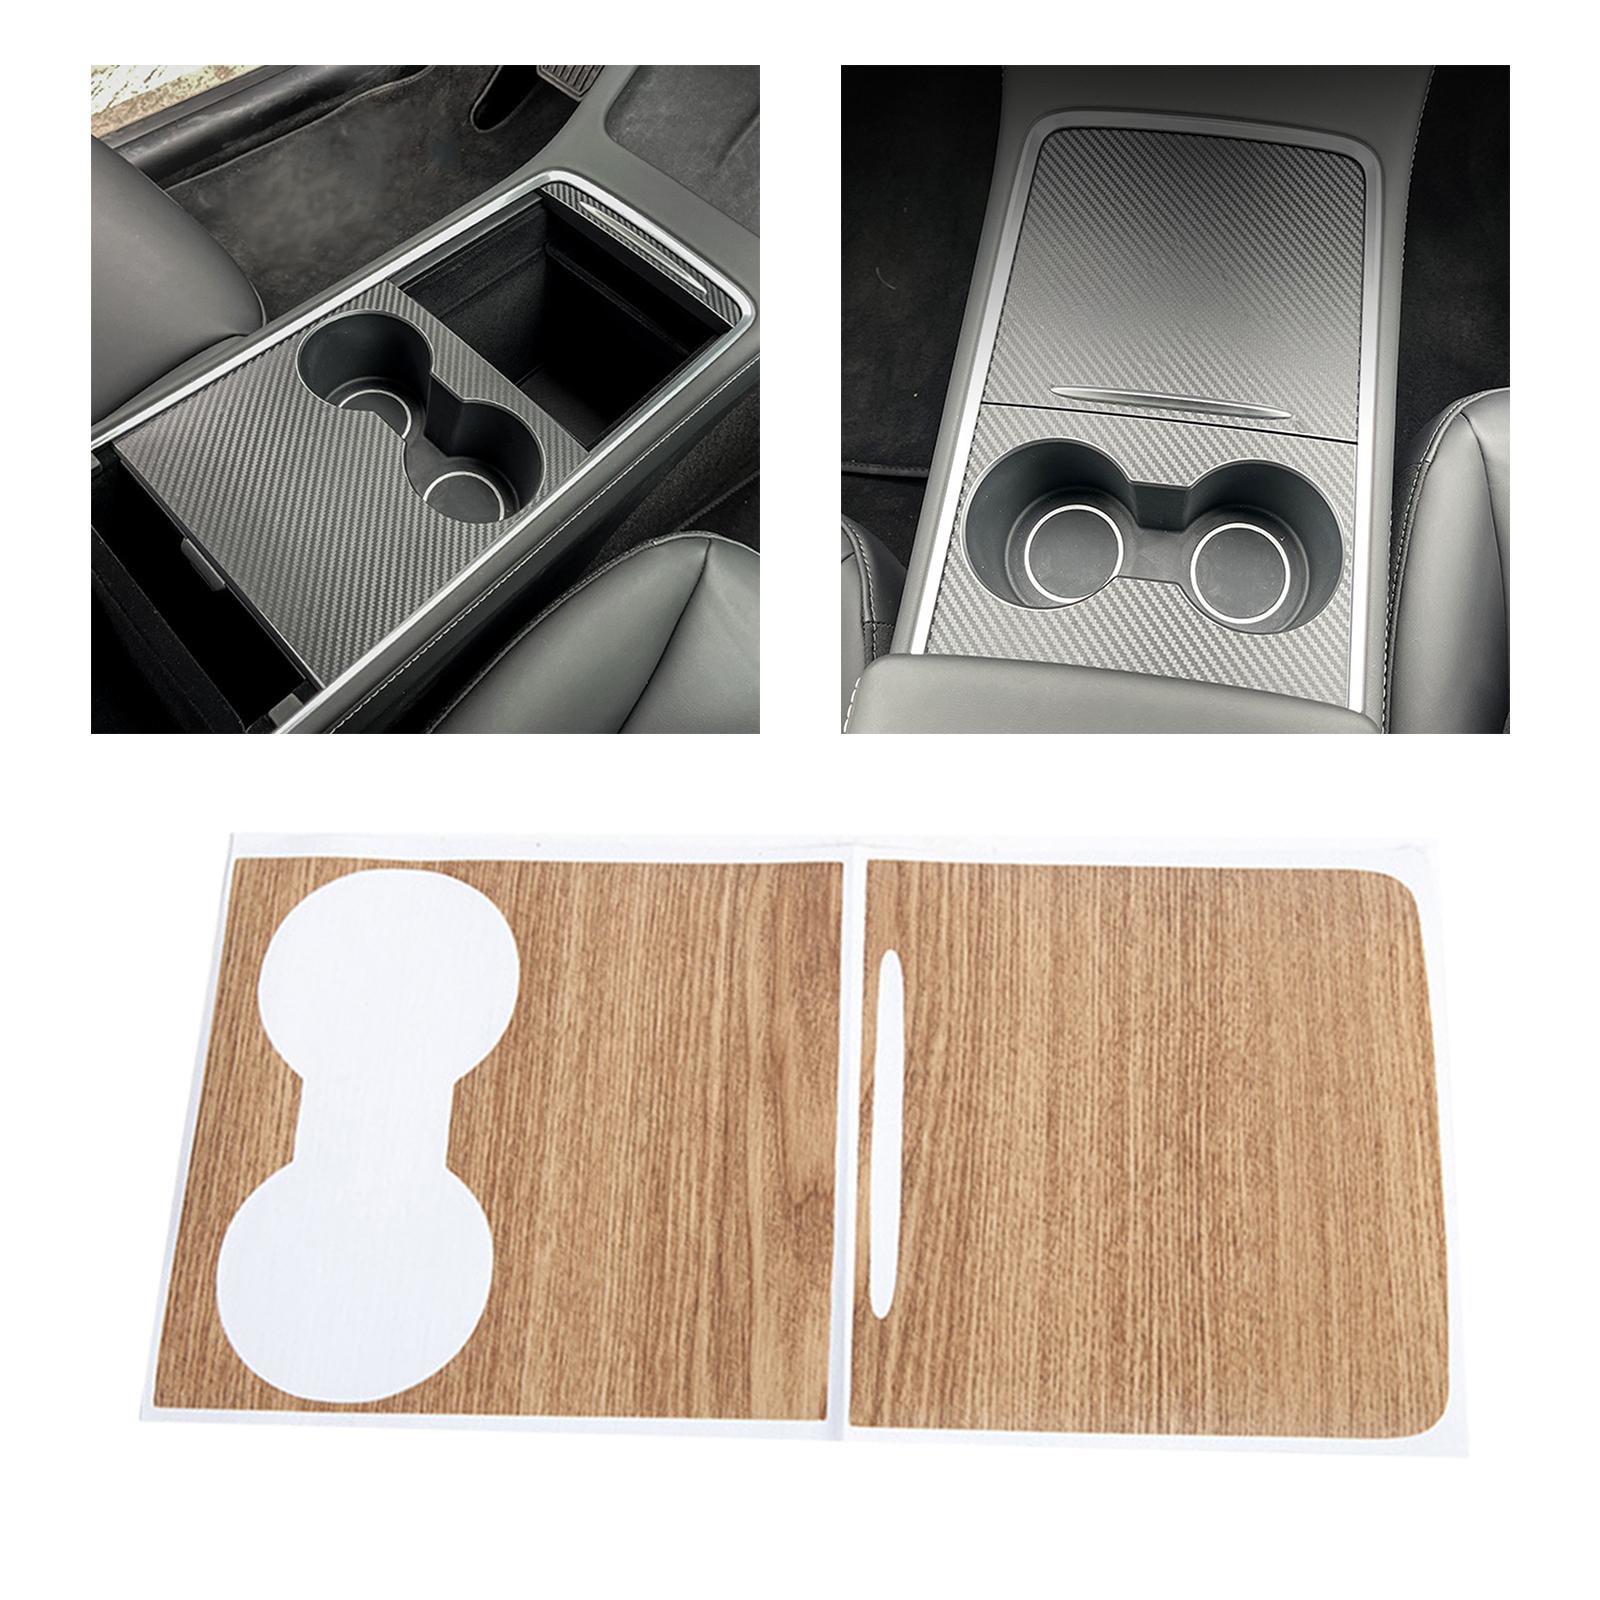 Automobile Central Control Panel Cover for Tesla Model 3 2021 Car Parts Wood Pattern